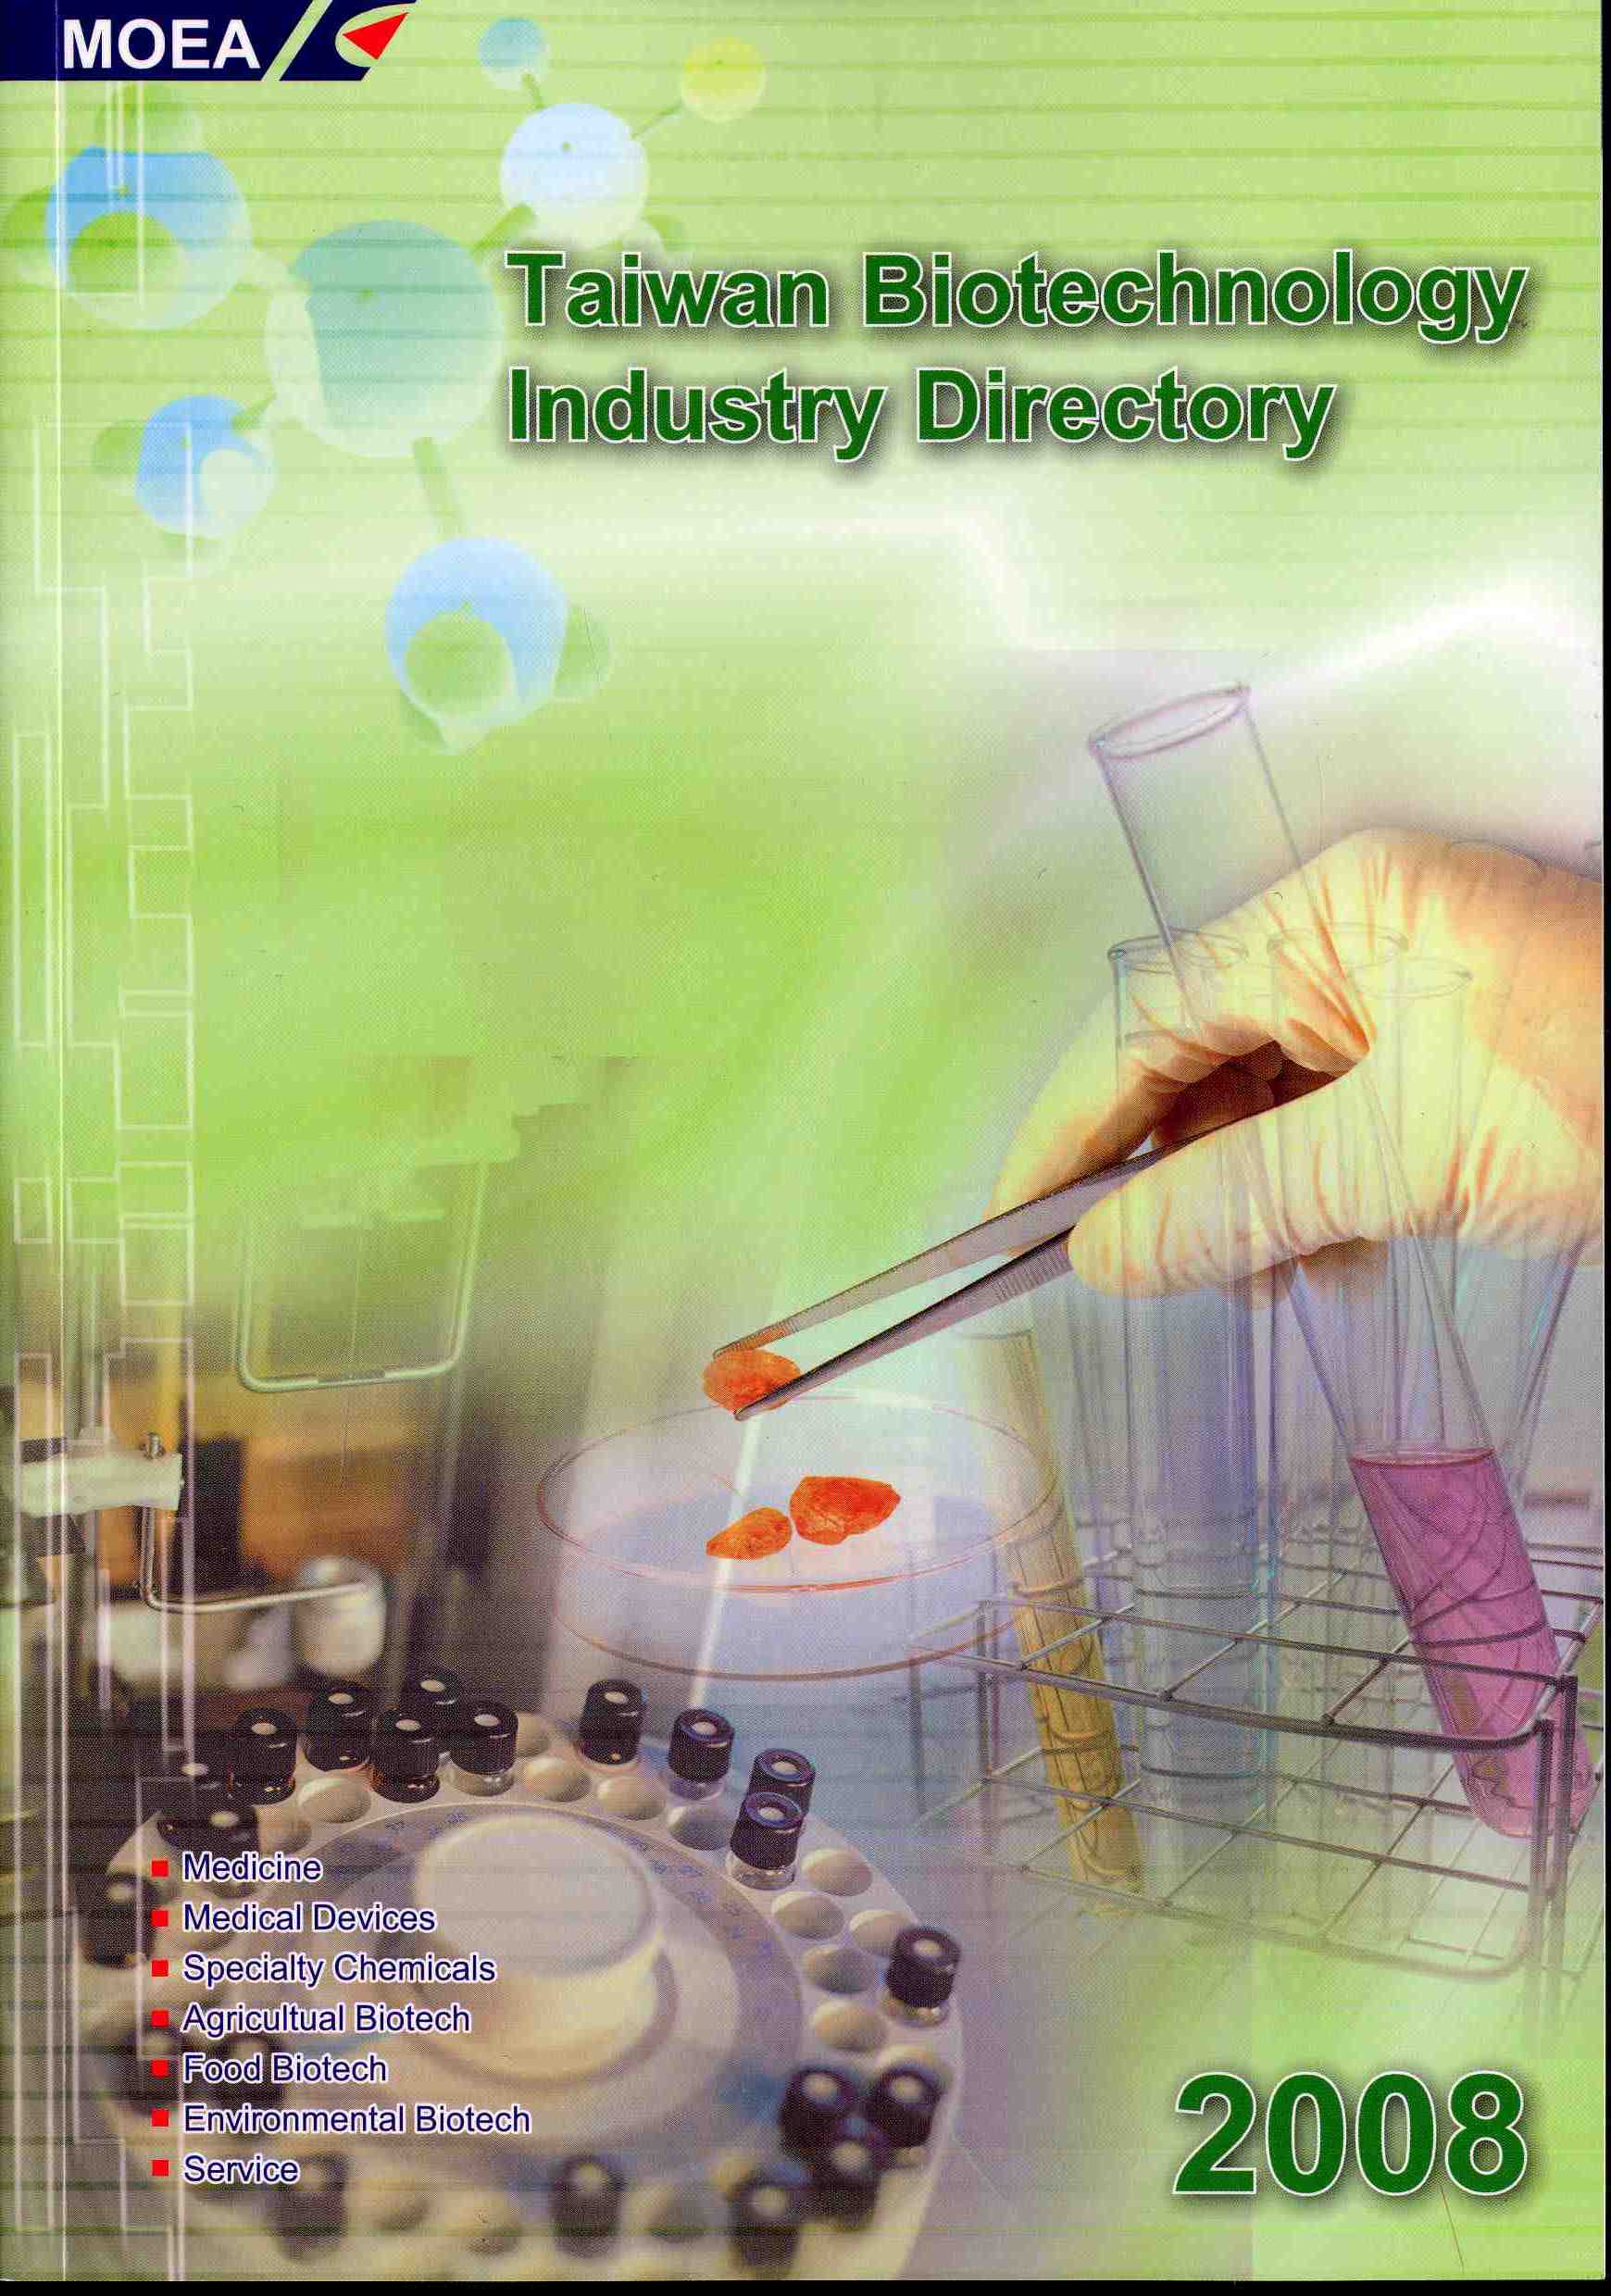  2008 Taiwan Biotechnology Industry Directory